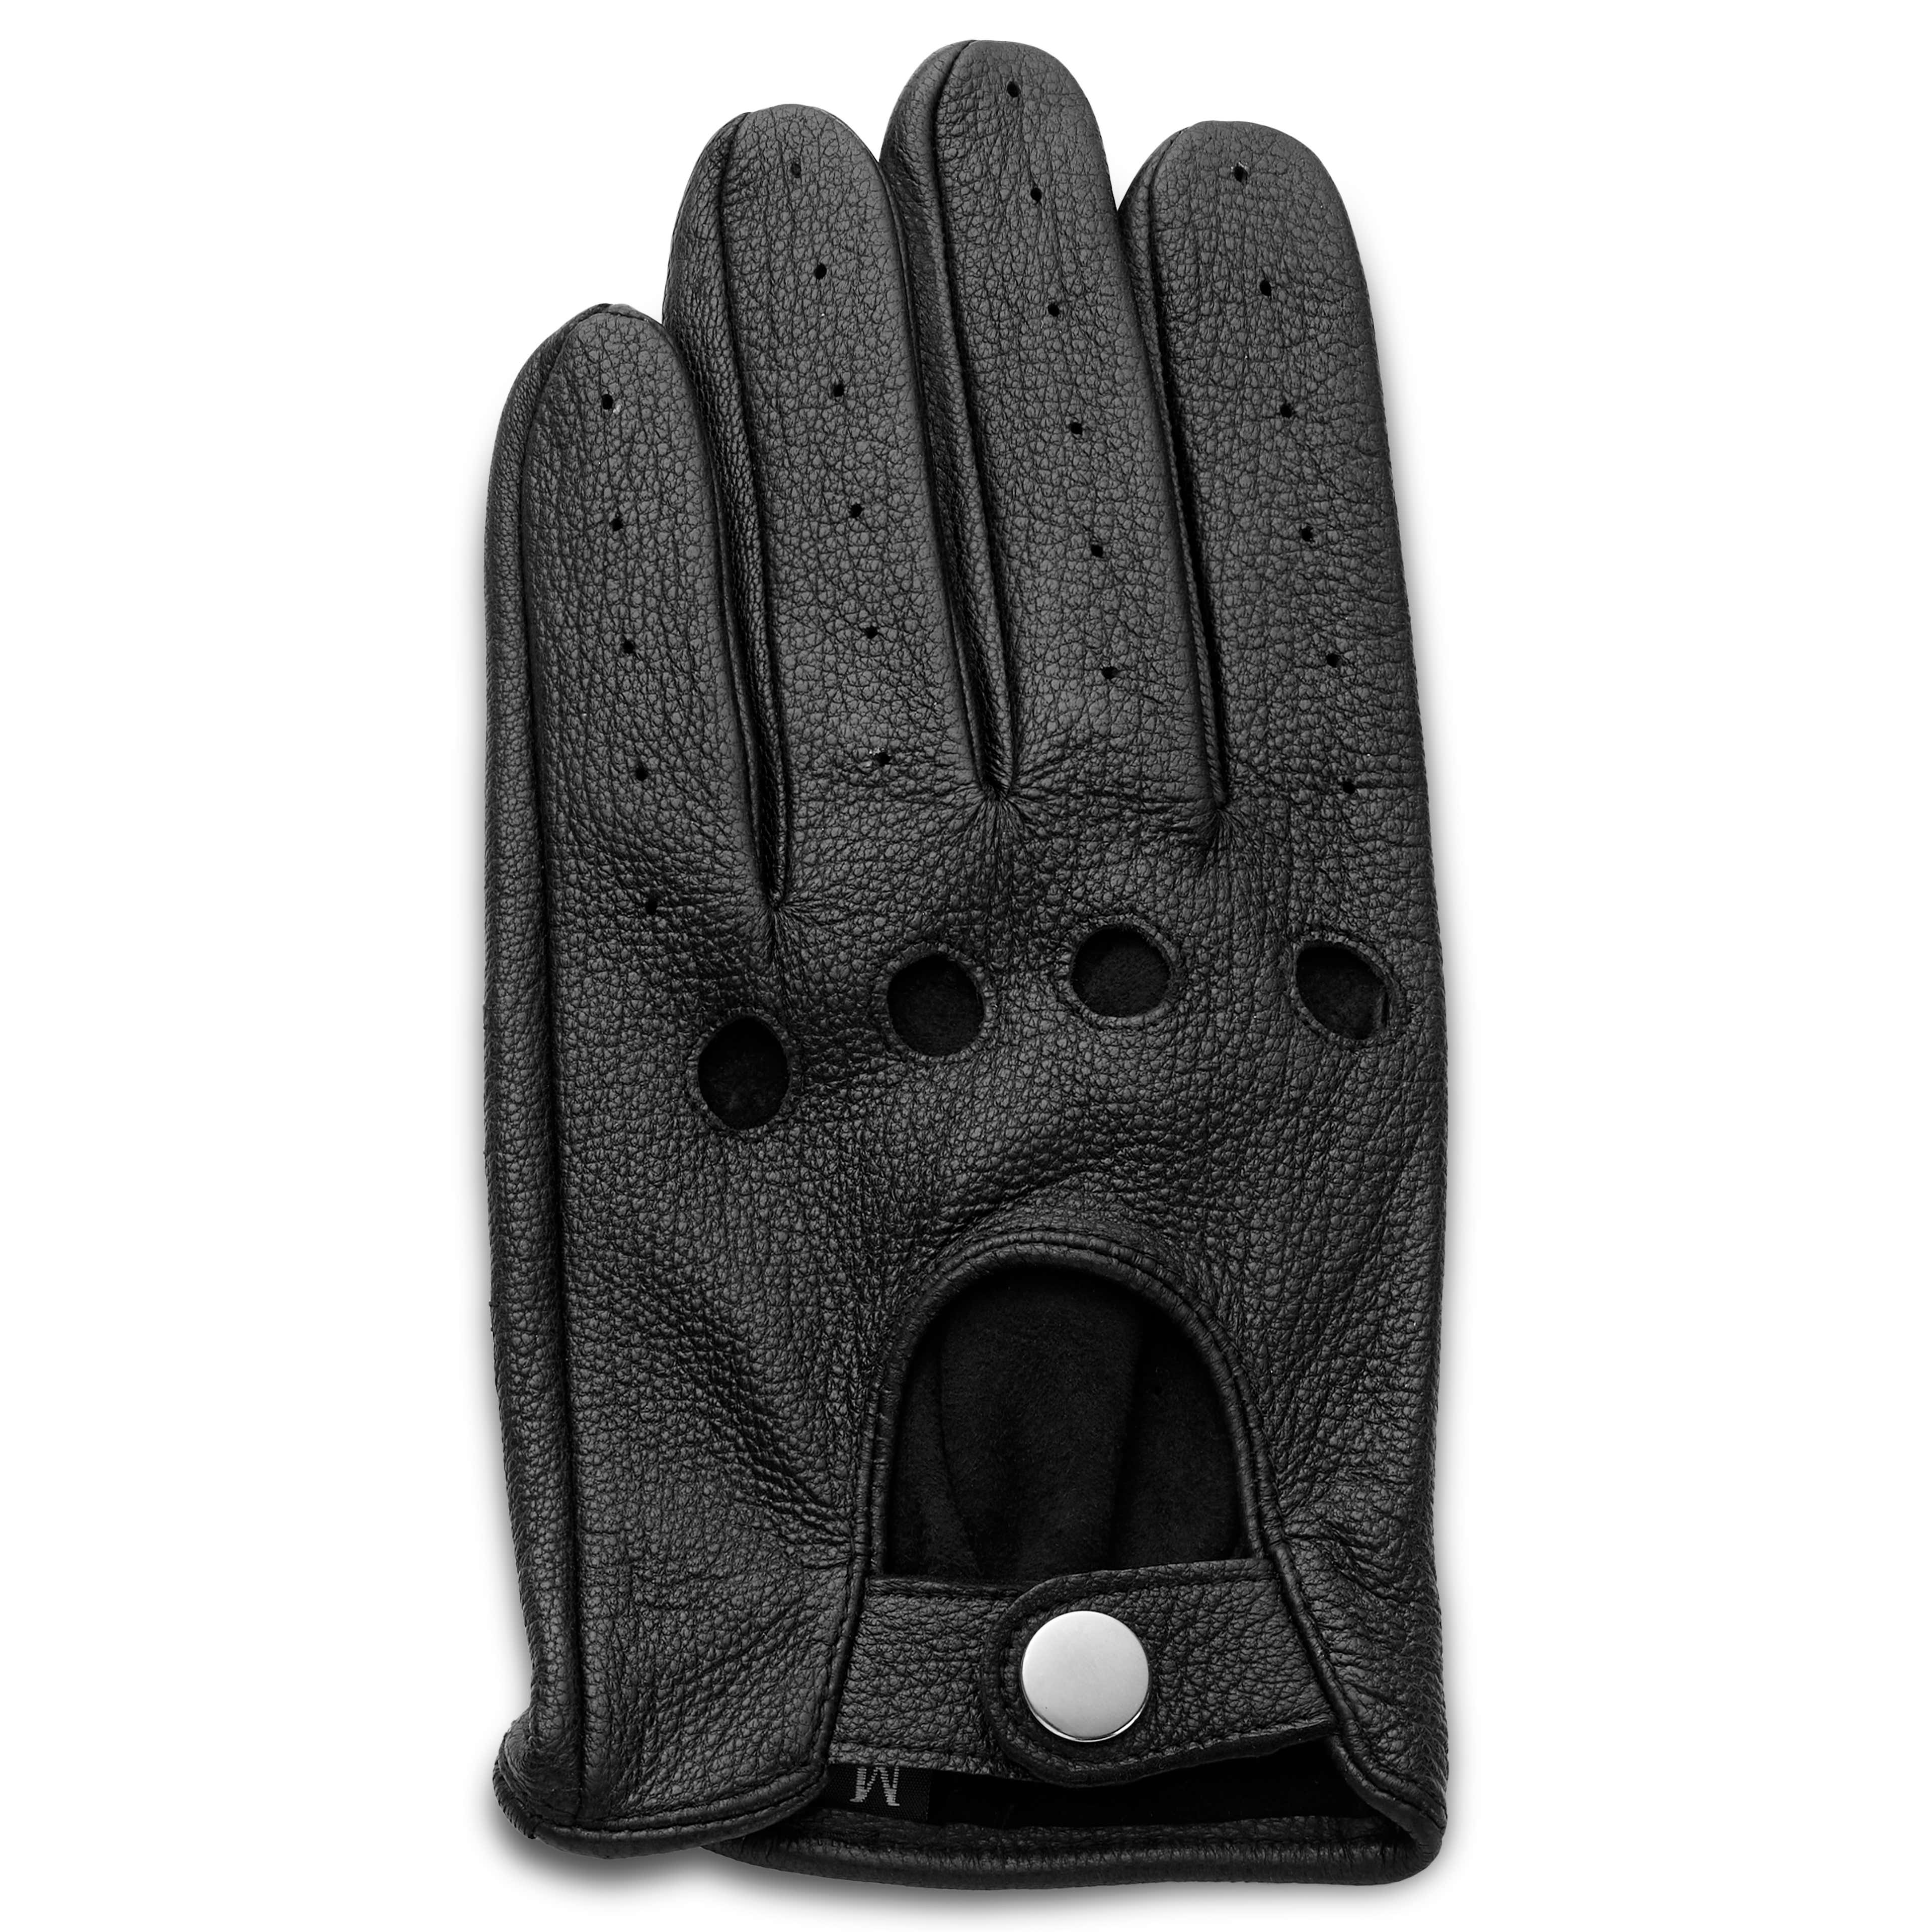 Black Sheep Leather Driving Gloves  - 4 - gallery